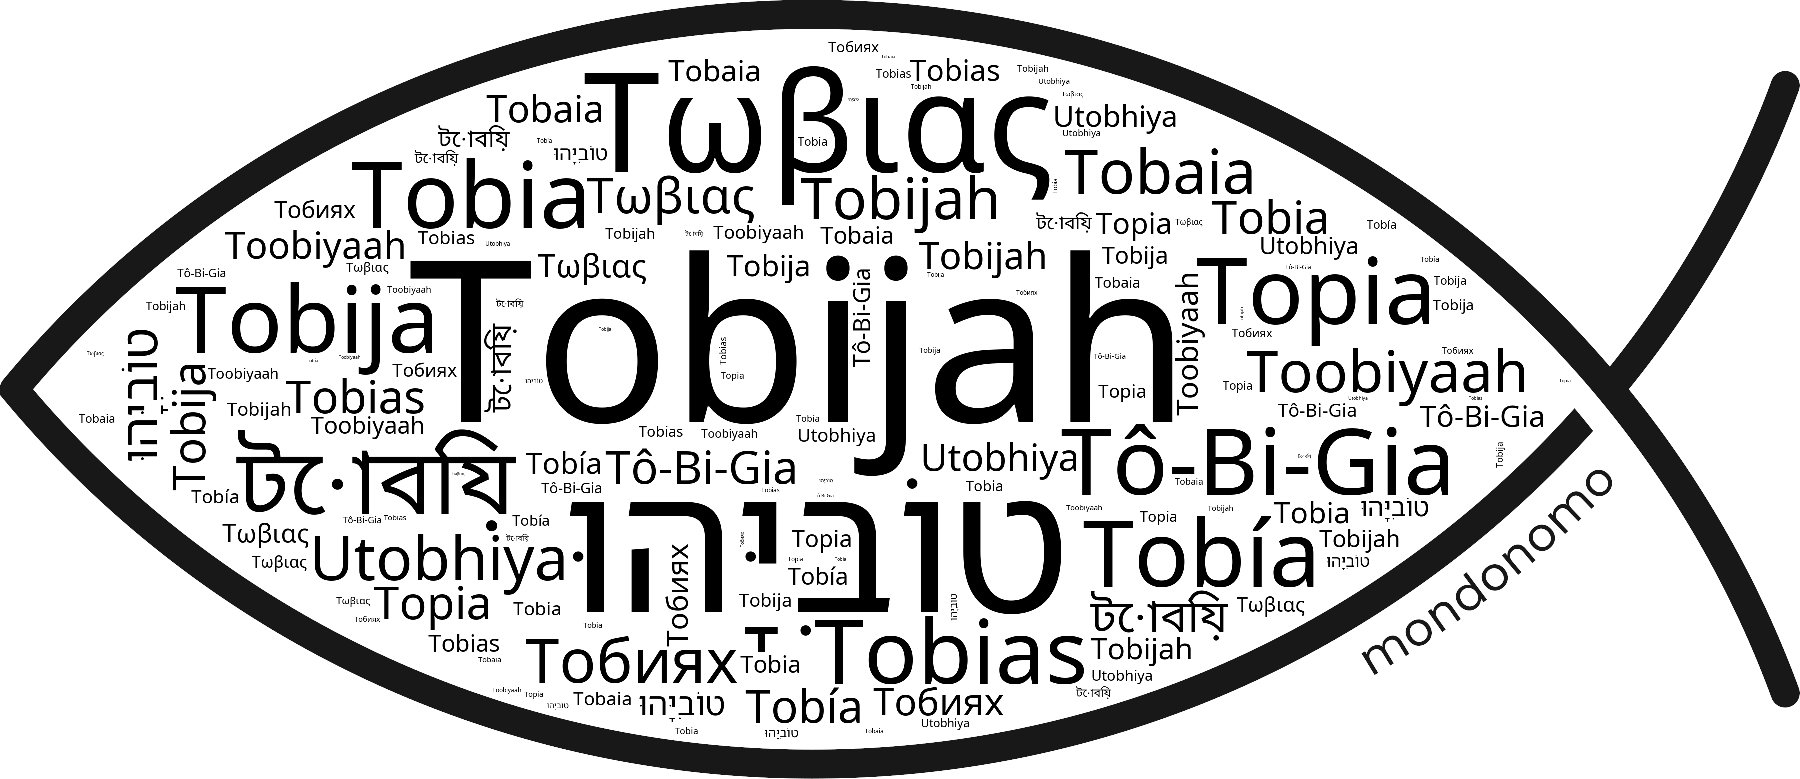 Name Tobijah in the world's Bibles